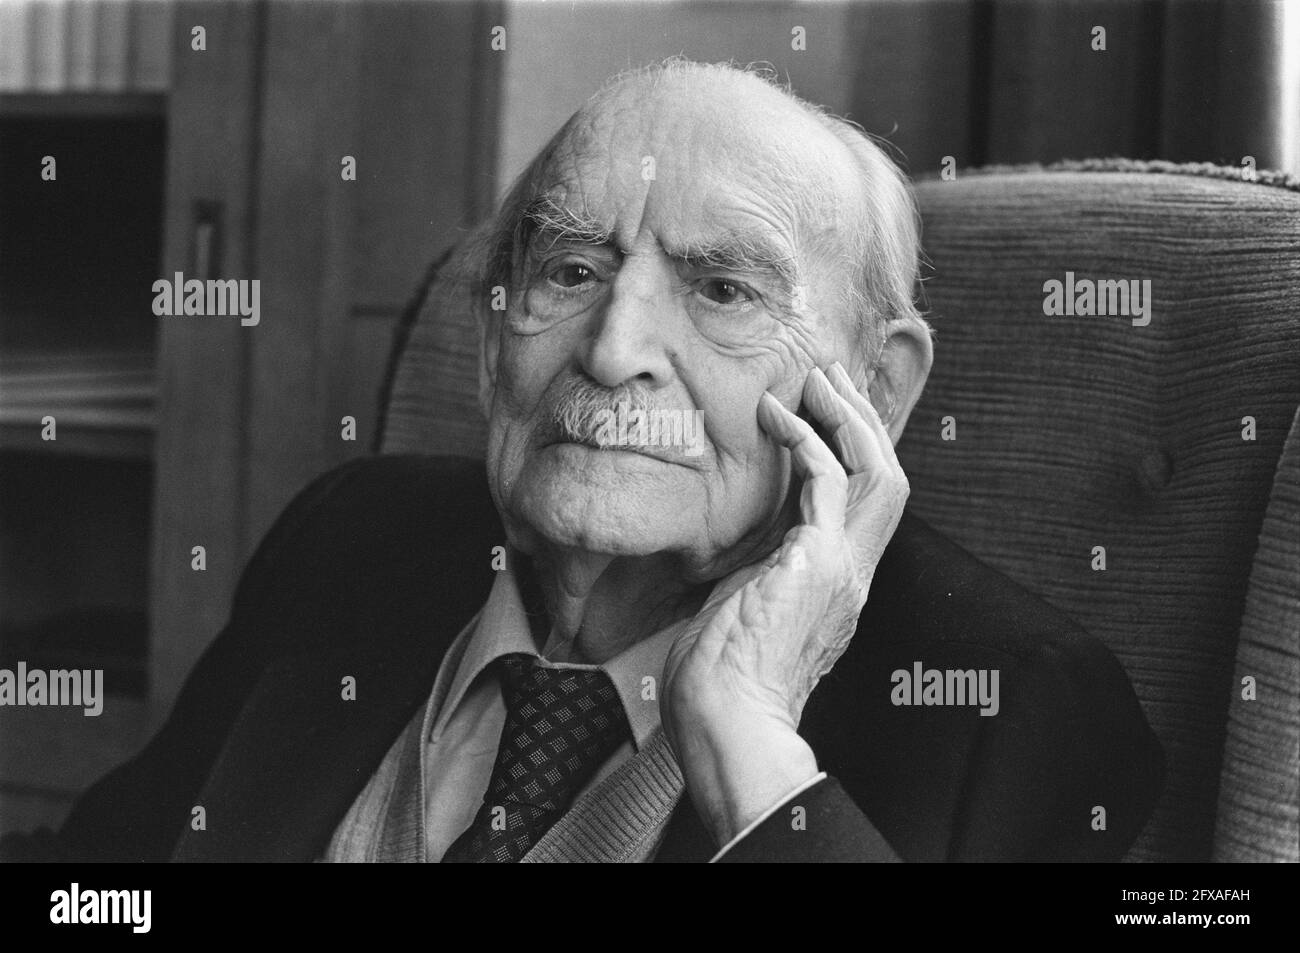 Dr. willem Drees sr. will be 98 years old on July 5, headline, July 3, 1984, portraits, The Netherlands, 20th century press agency photo, news to remember, documentary, historic photography 1945-1990, visual stories, human history of the Twentieth Century, capturing moments in time Stock Photo